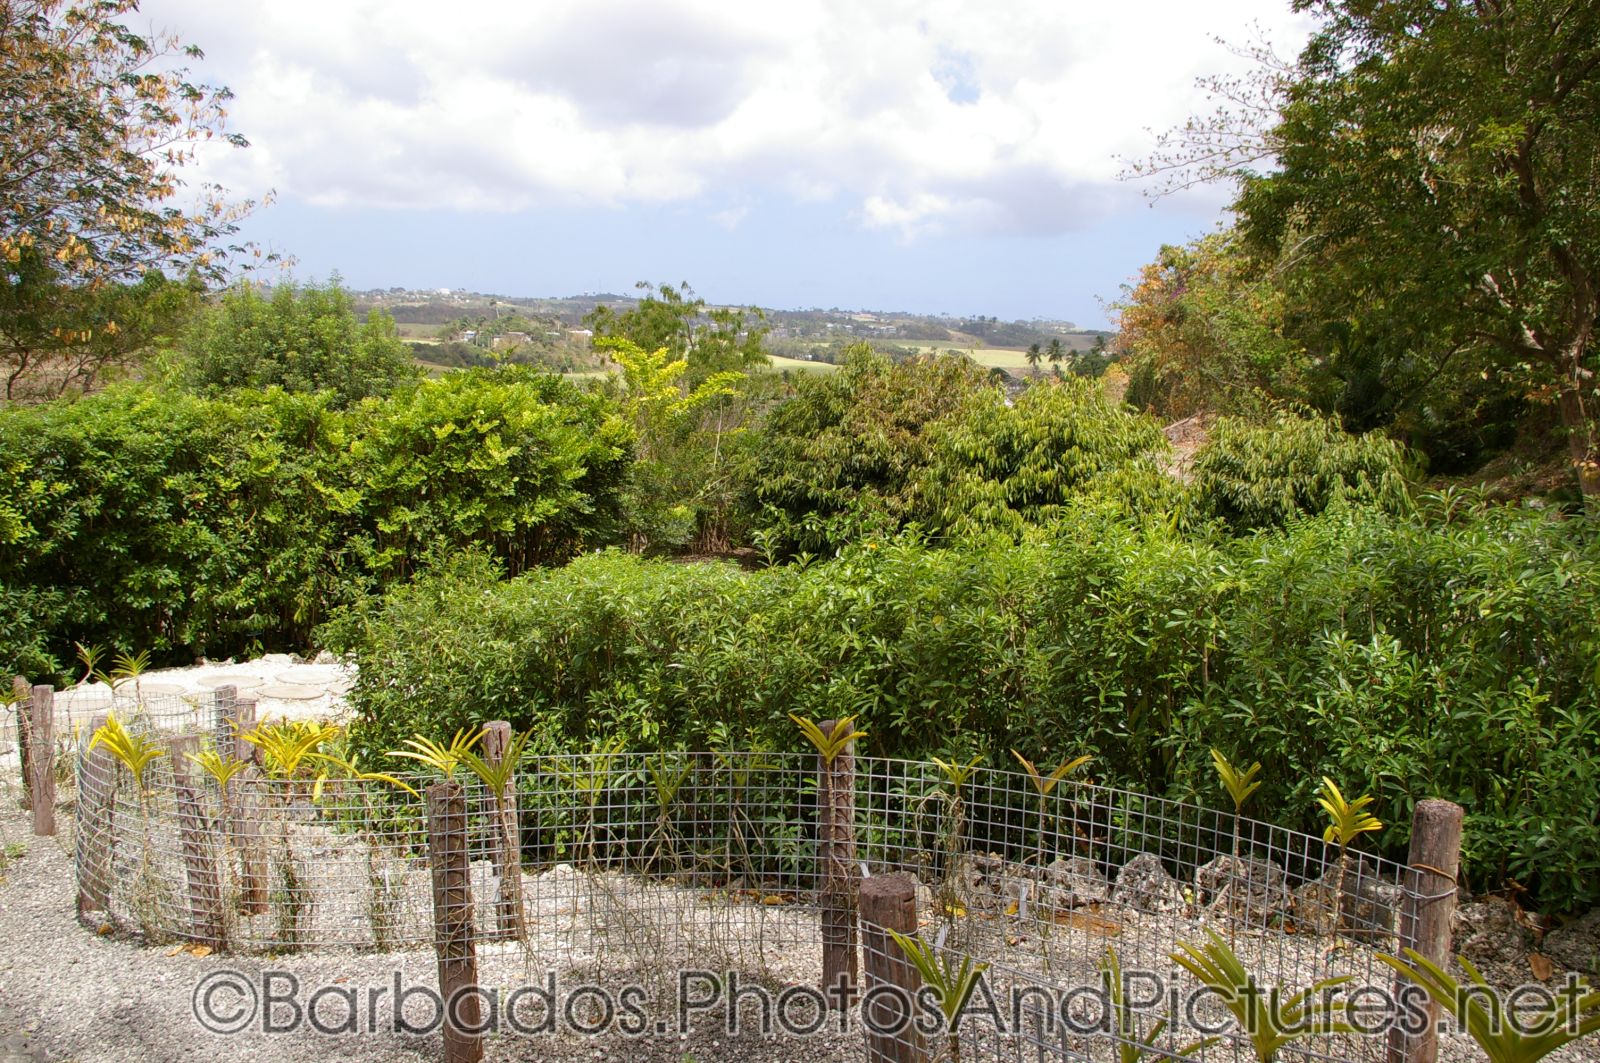 Pebble lined path at Orchid World in Barbados.jpg
